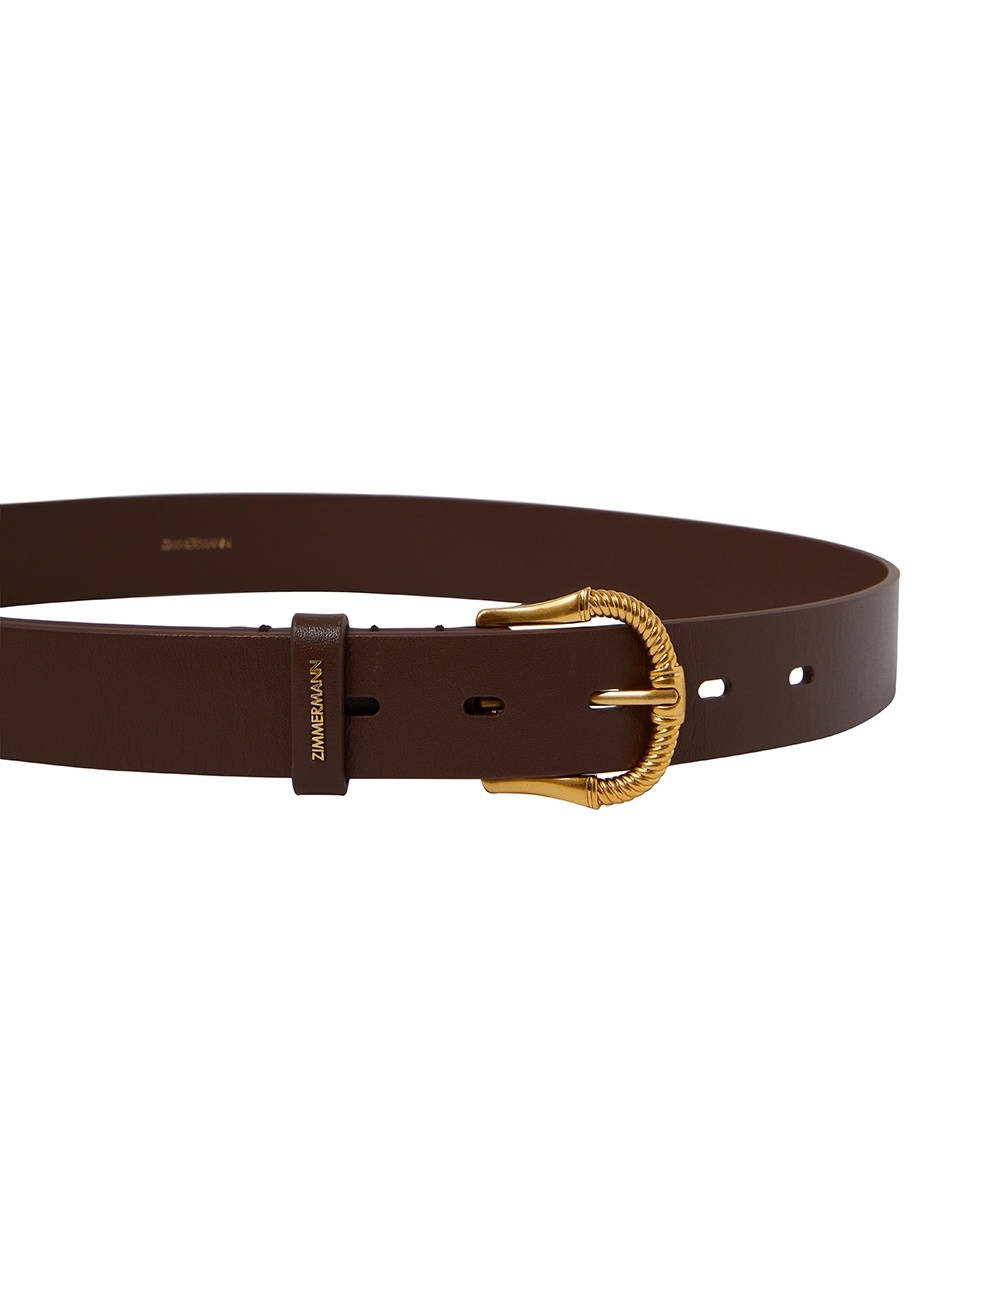 TWISTED BUCKLE LEATHER BELT 30 - 3